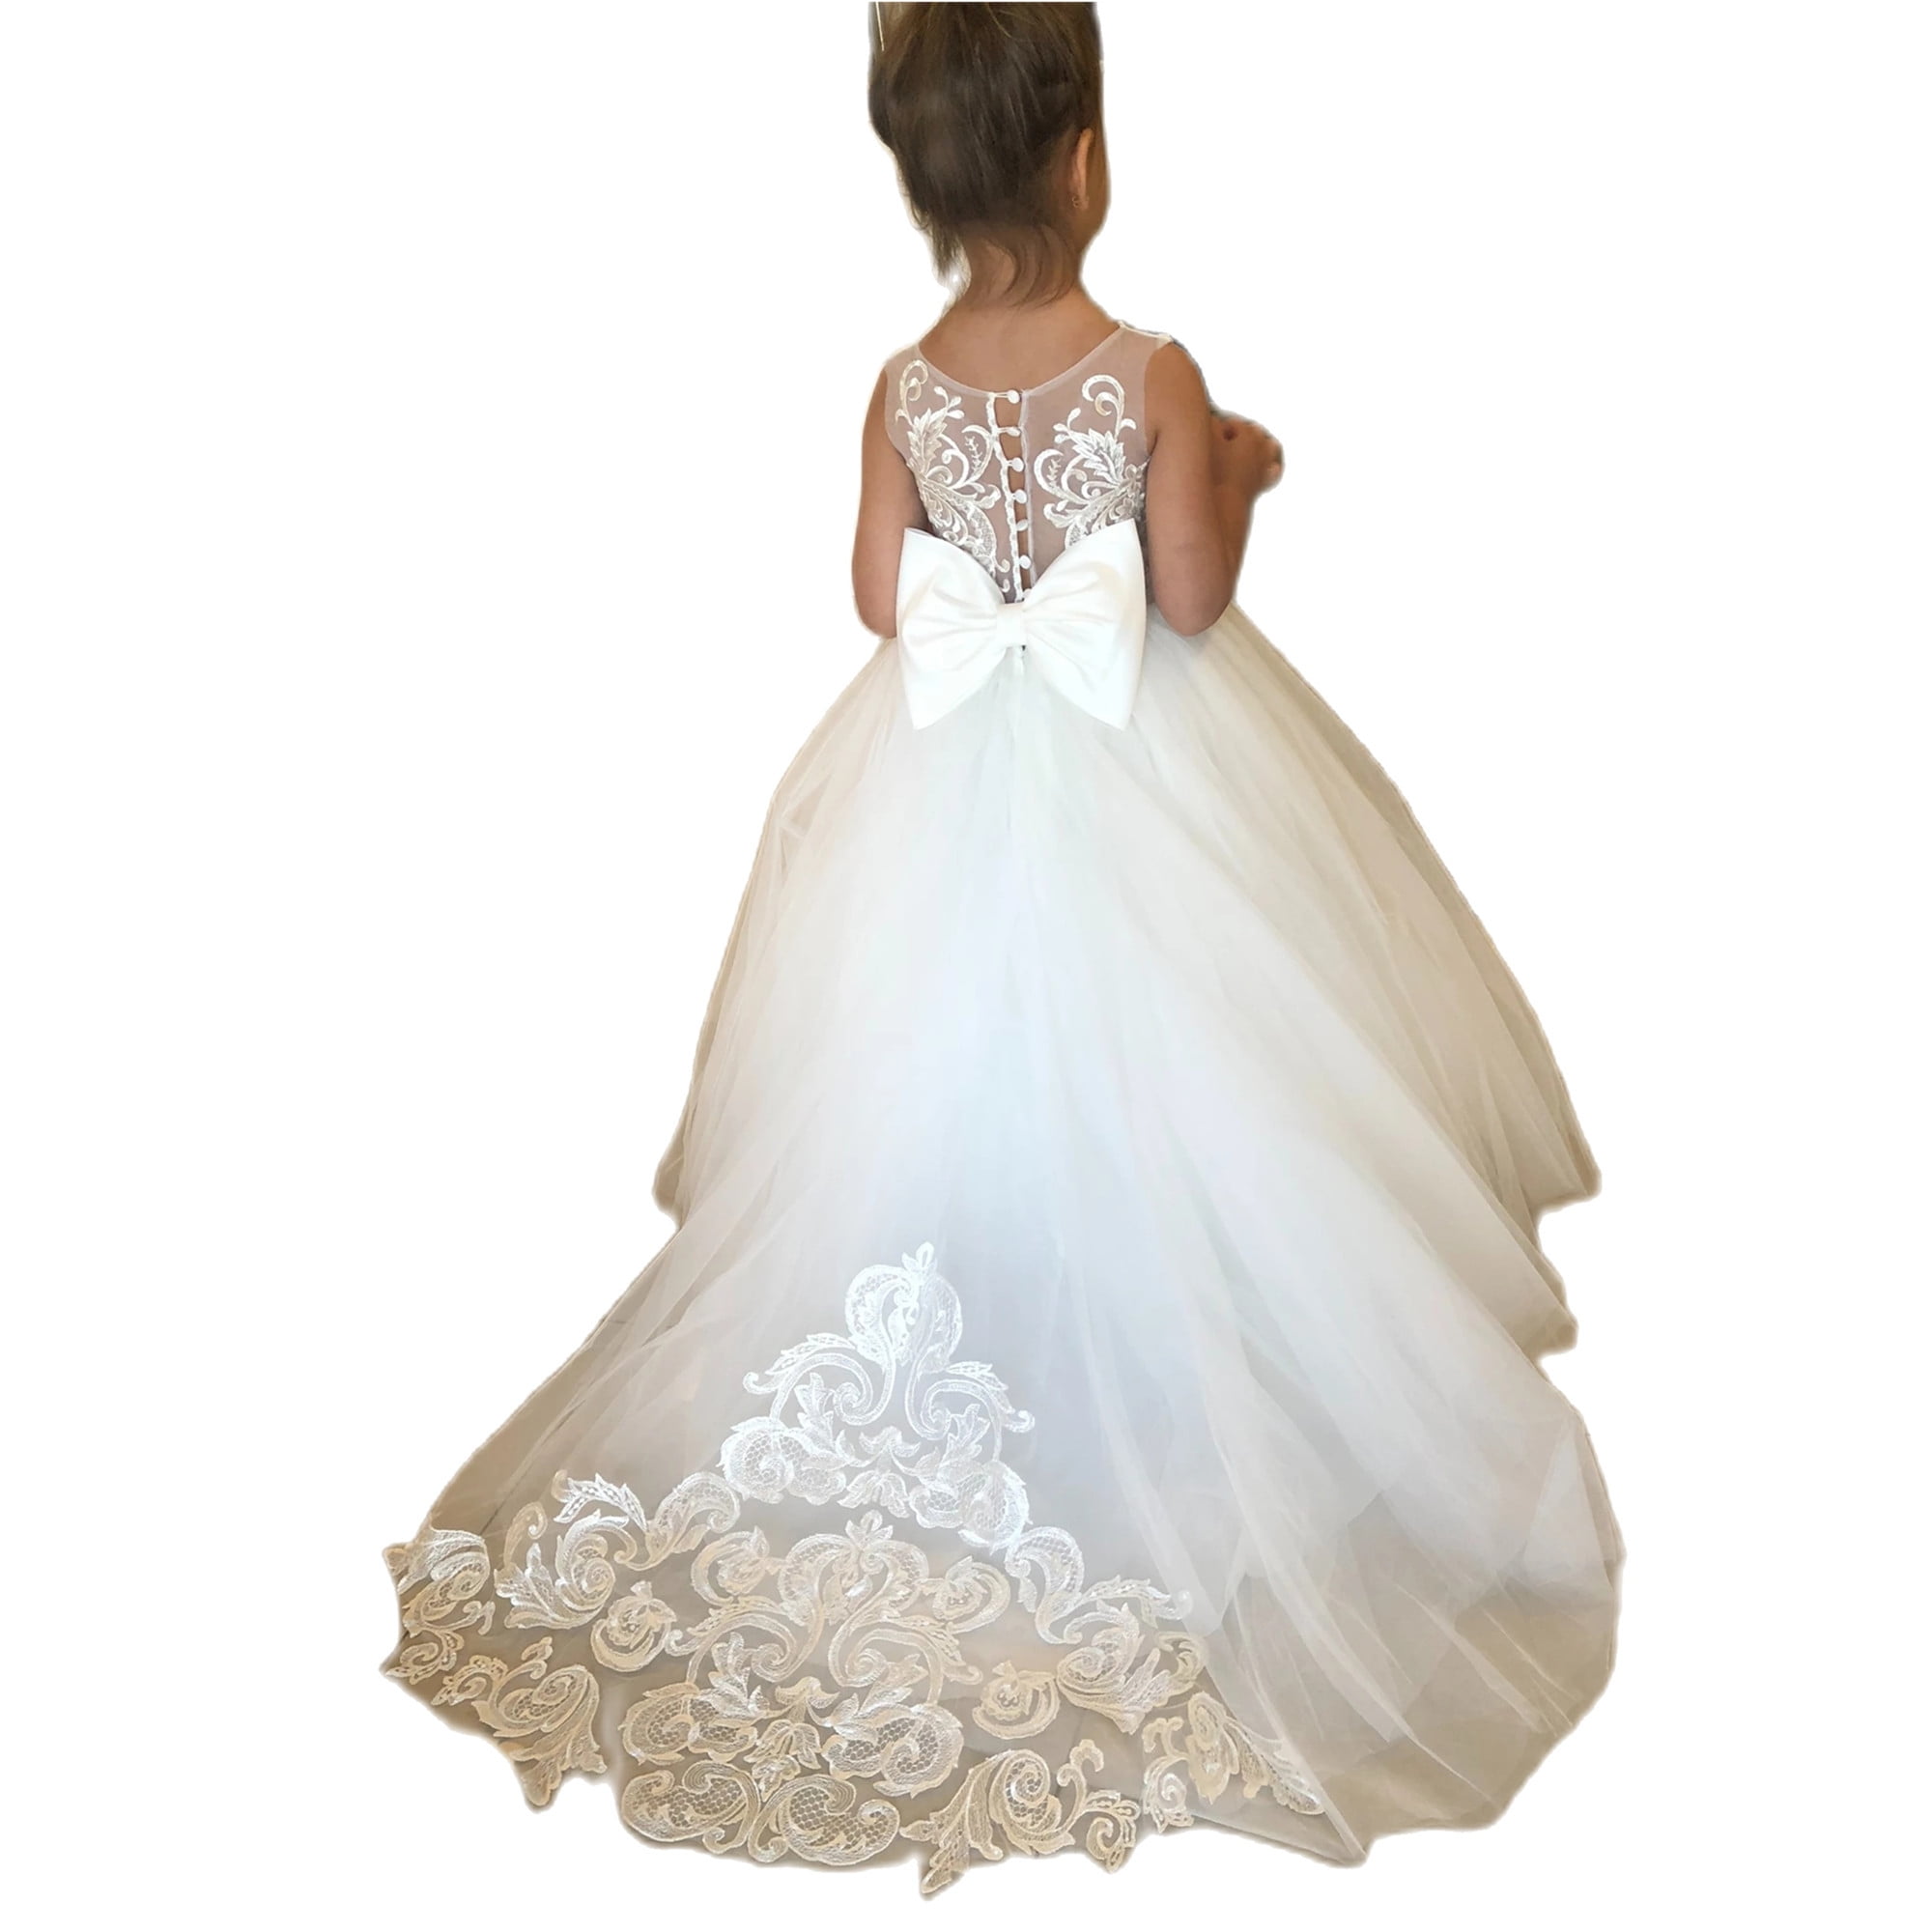 MisShow Lace Flower Girls Dresses with Back Bow Ball Gown Princess ...